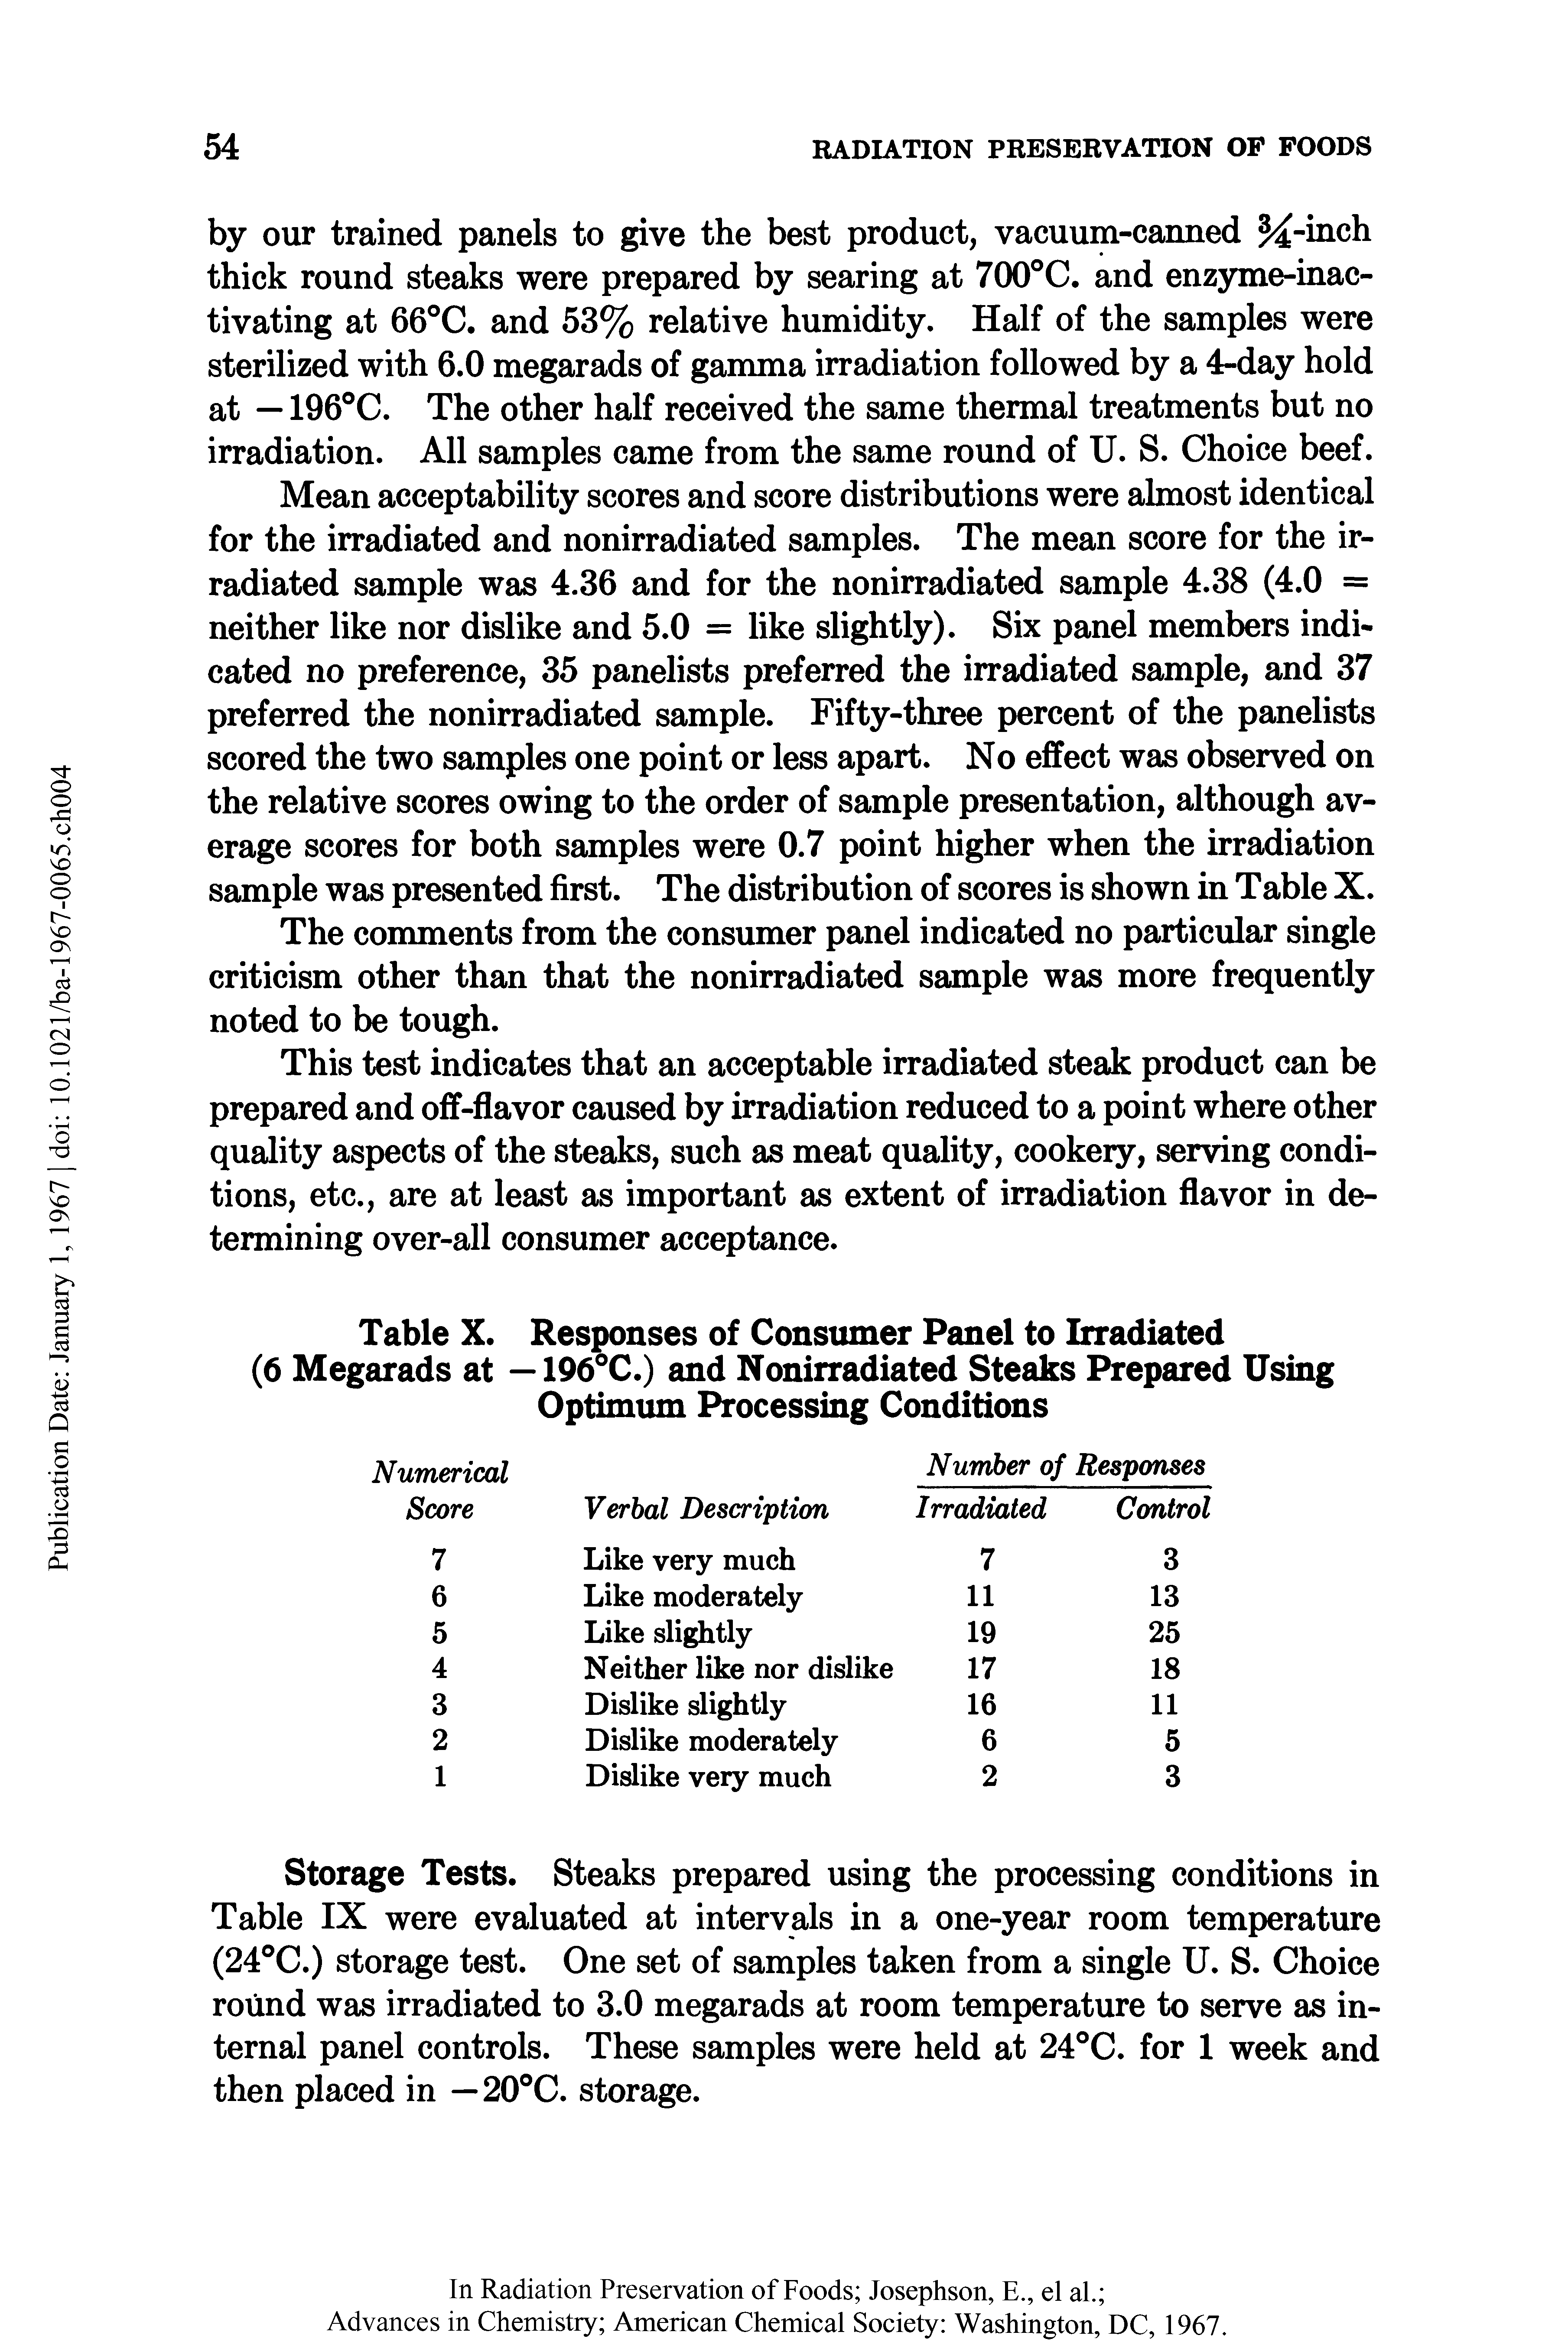 Table X. Responses of Consumer Panel to Irradiated (6 Megarads at — 196°C.) and Nonirradiated Steaks Prepared Using Optimum Processing Conditions...